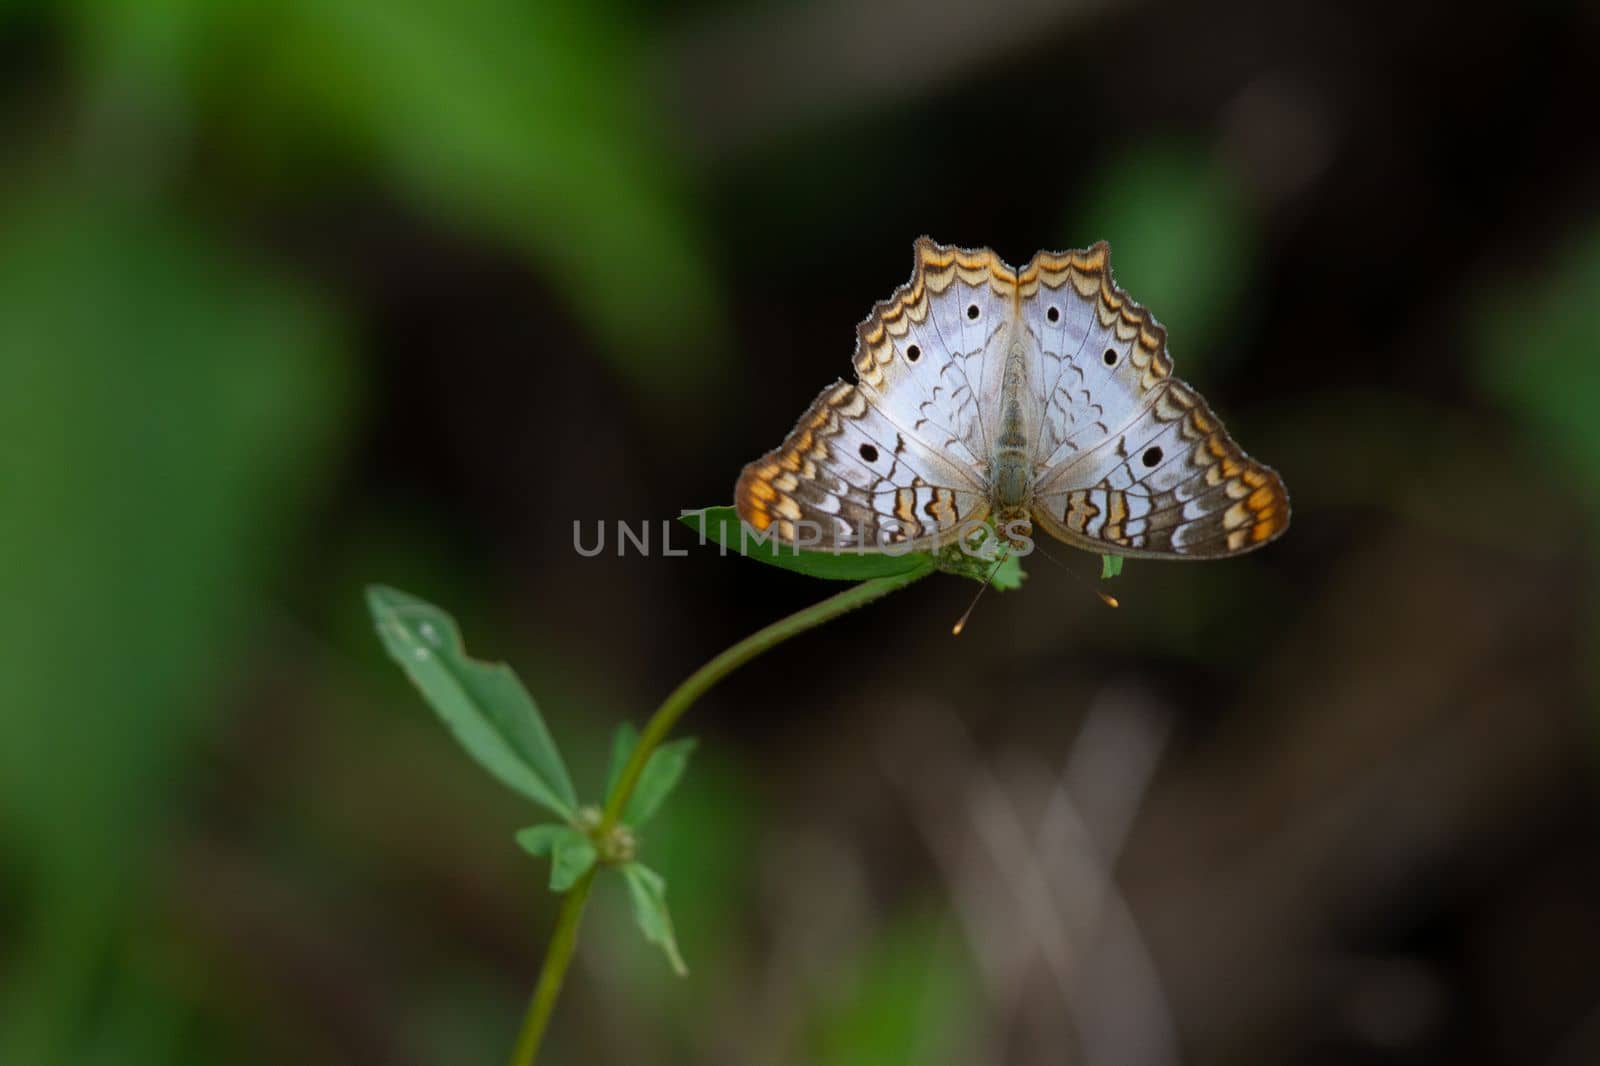 White Peacock Anartia-jatrophae butterfly that landed on a small plant, near Everglades by Granchinho